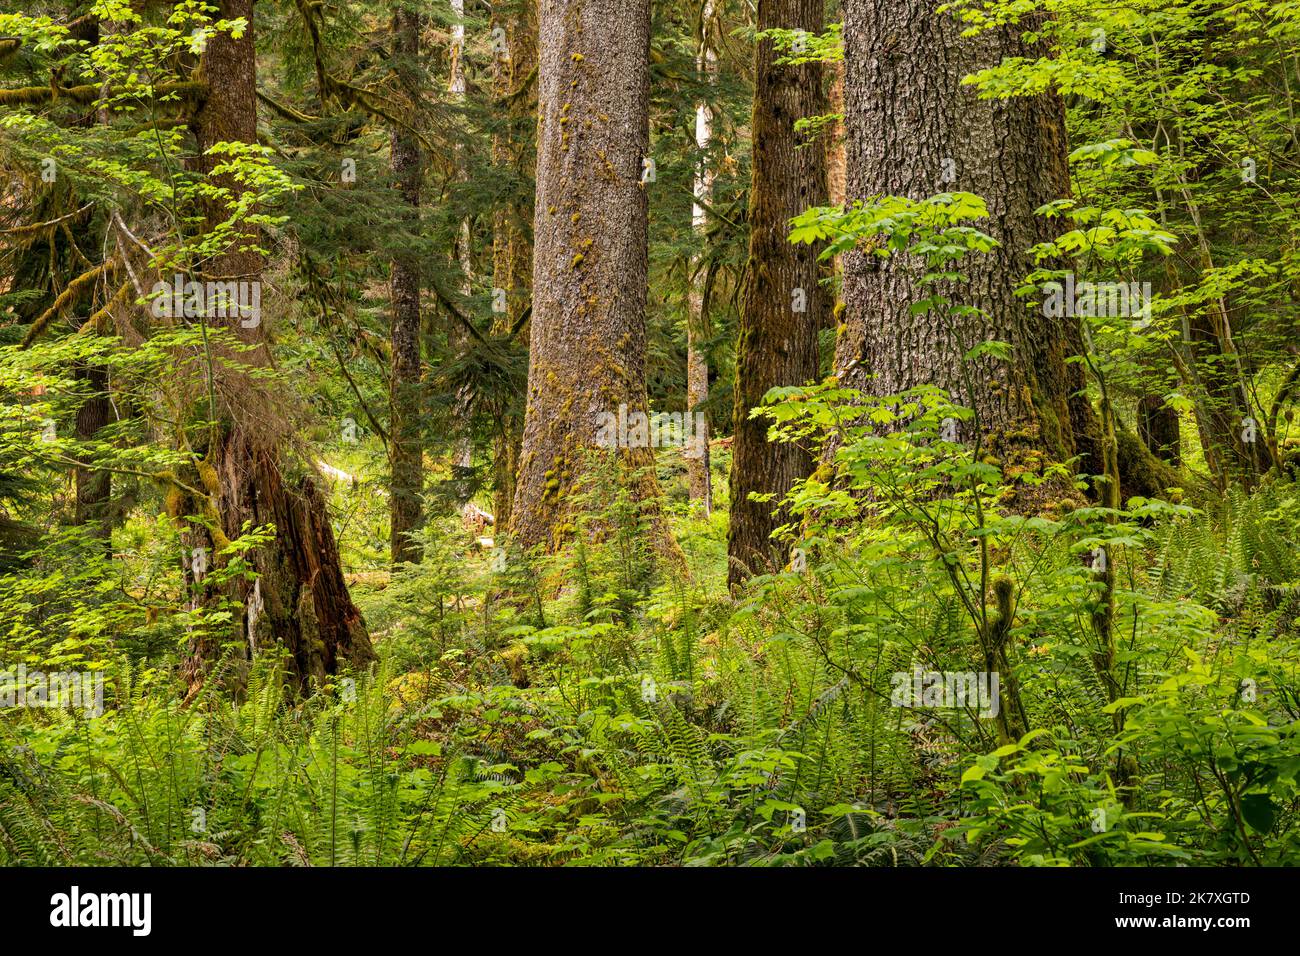 WA22408-00...WASHINGTON - Western sword ferns and young  Big Leaf Maple trees surround towering evergreen trees in the Quinault Rain Forest, ONP. Stock Photo